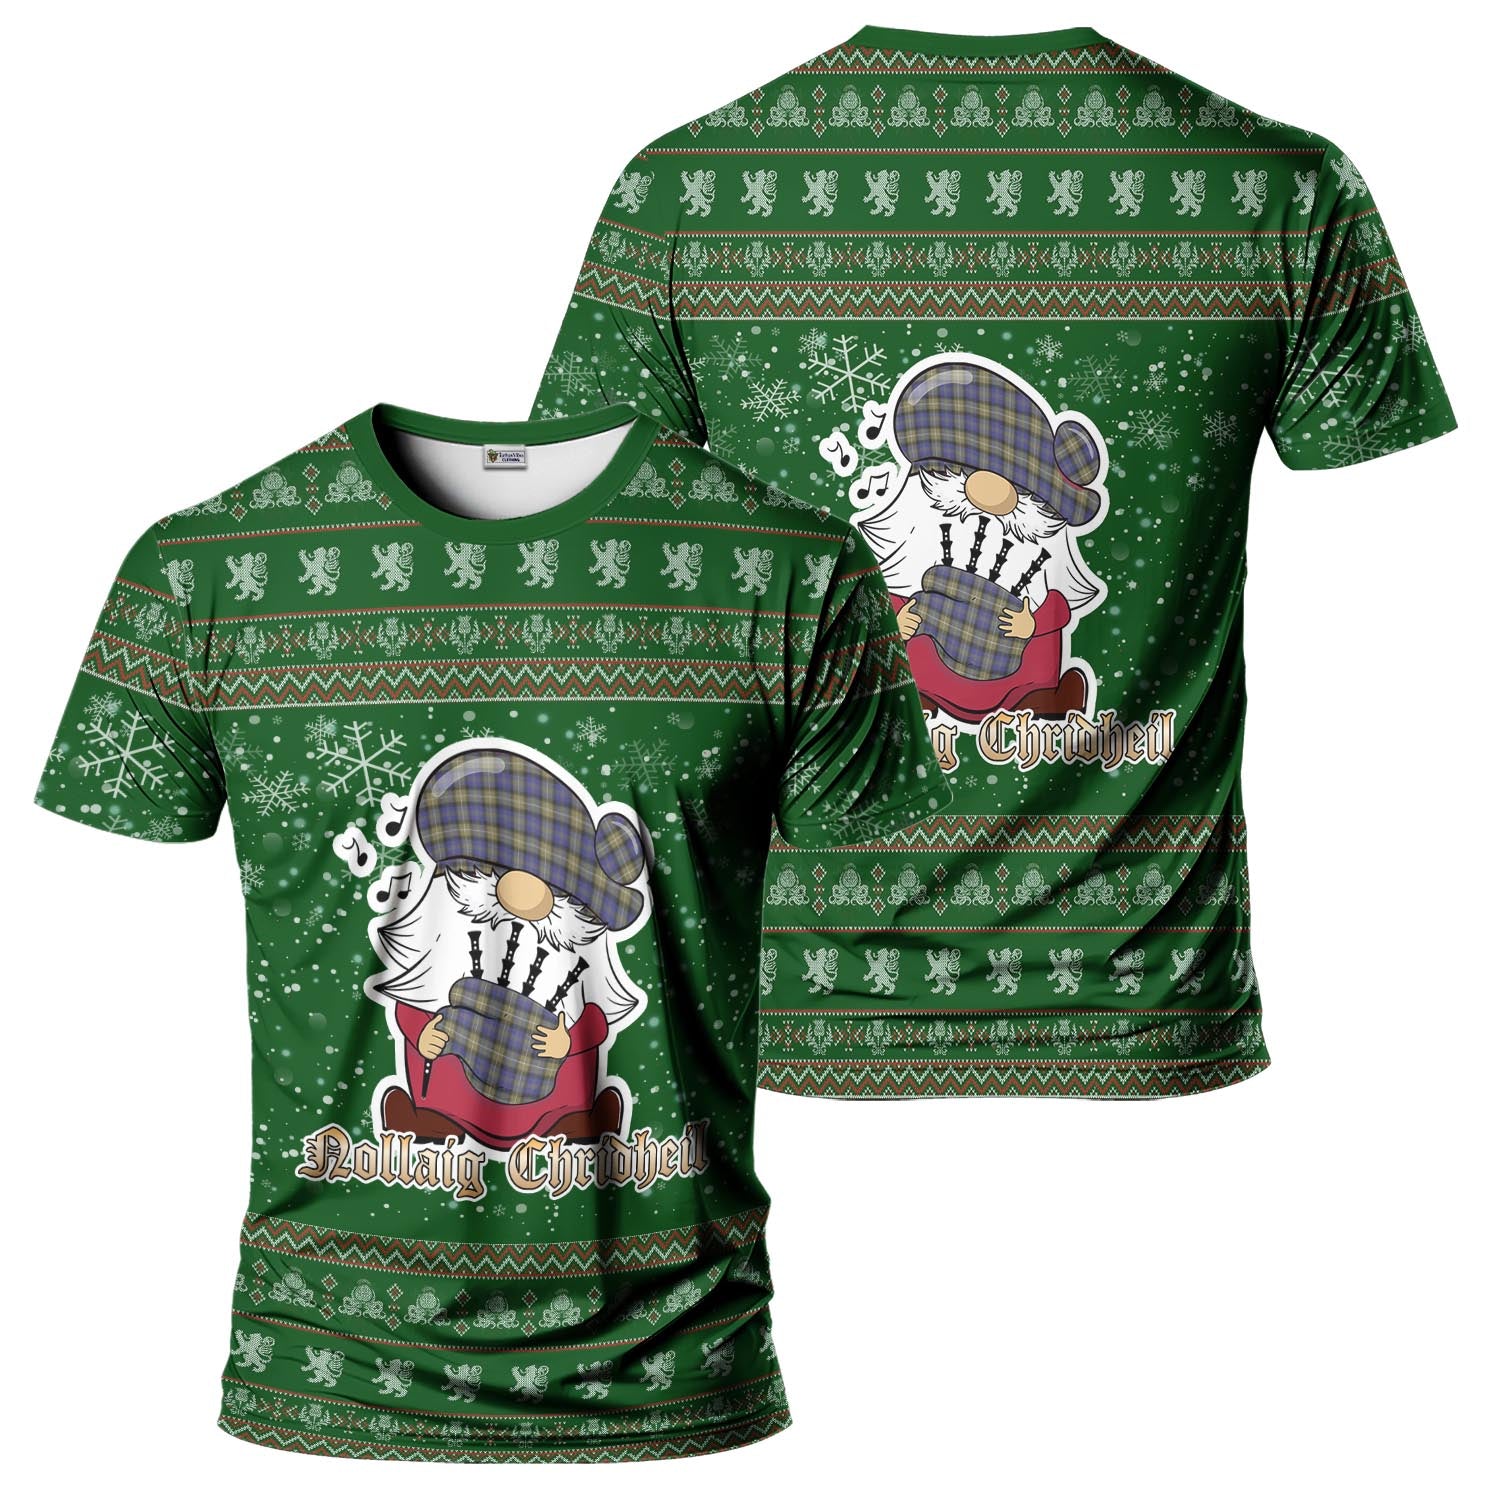 Rennie Clan Christmas Family T-Shirt with Funny Gnome Playing Bagpipes Men's Shirt Green - Tartanvibesclothing